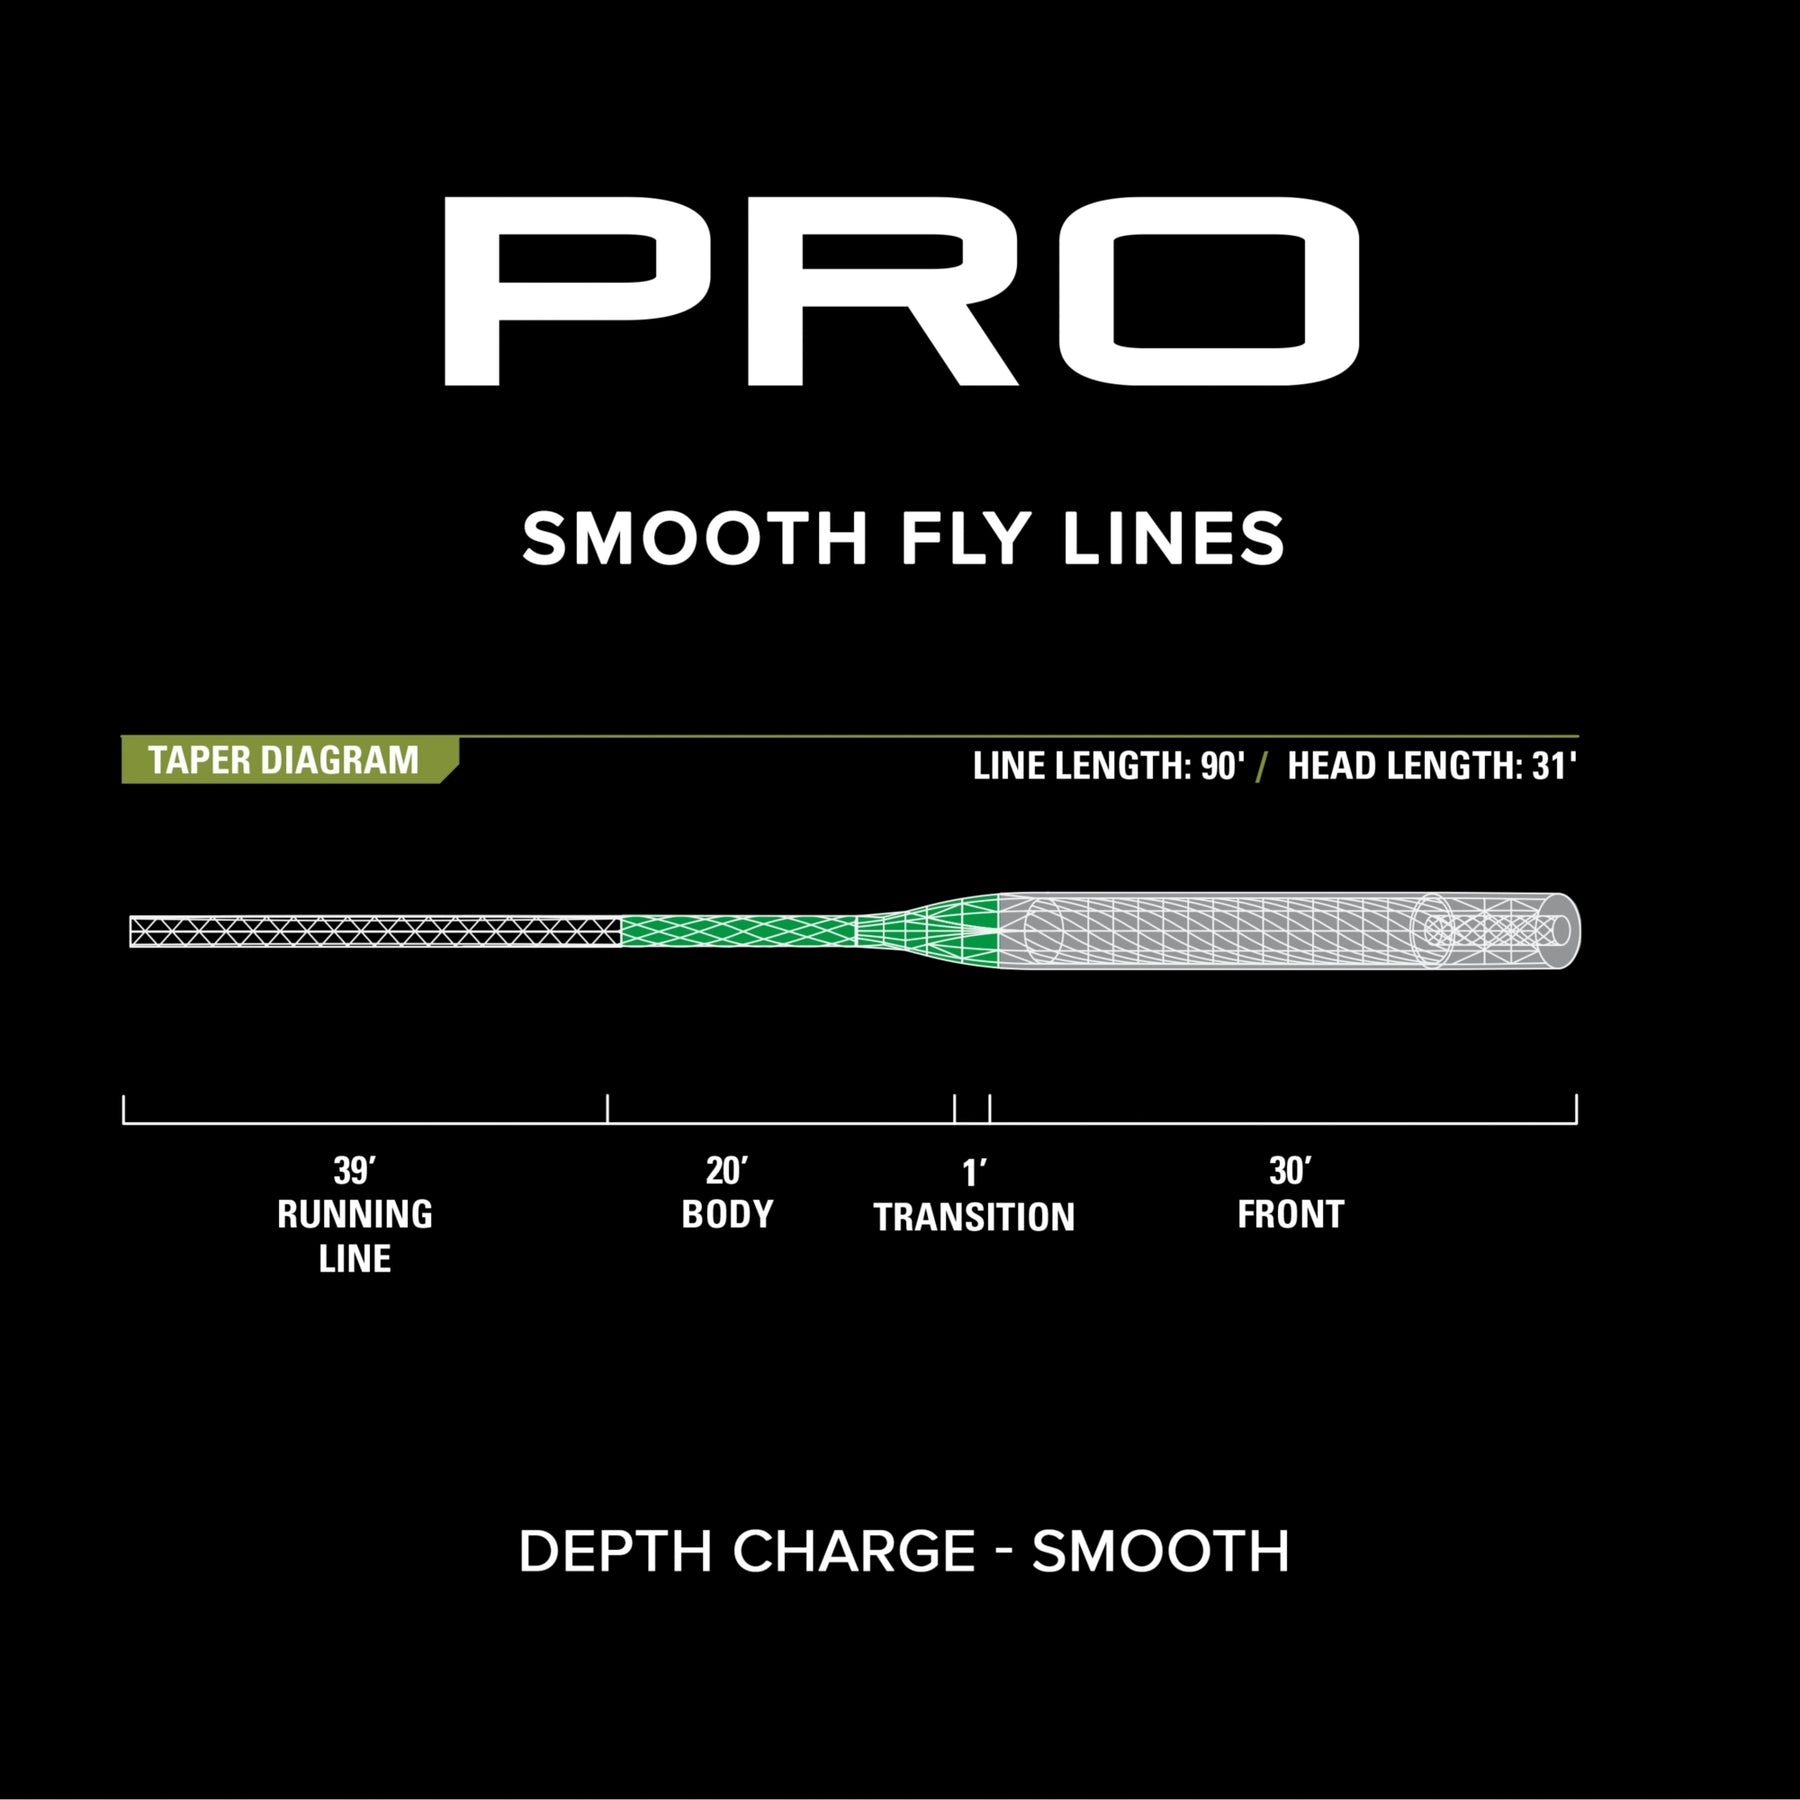 Orvis Pro Trout Textured Fly Line – Out Fly Fishing